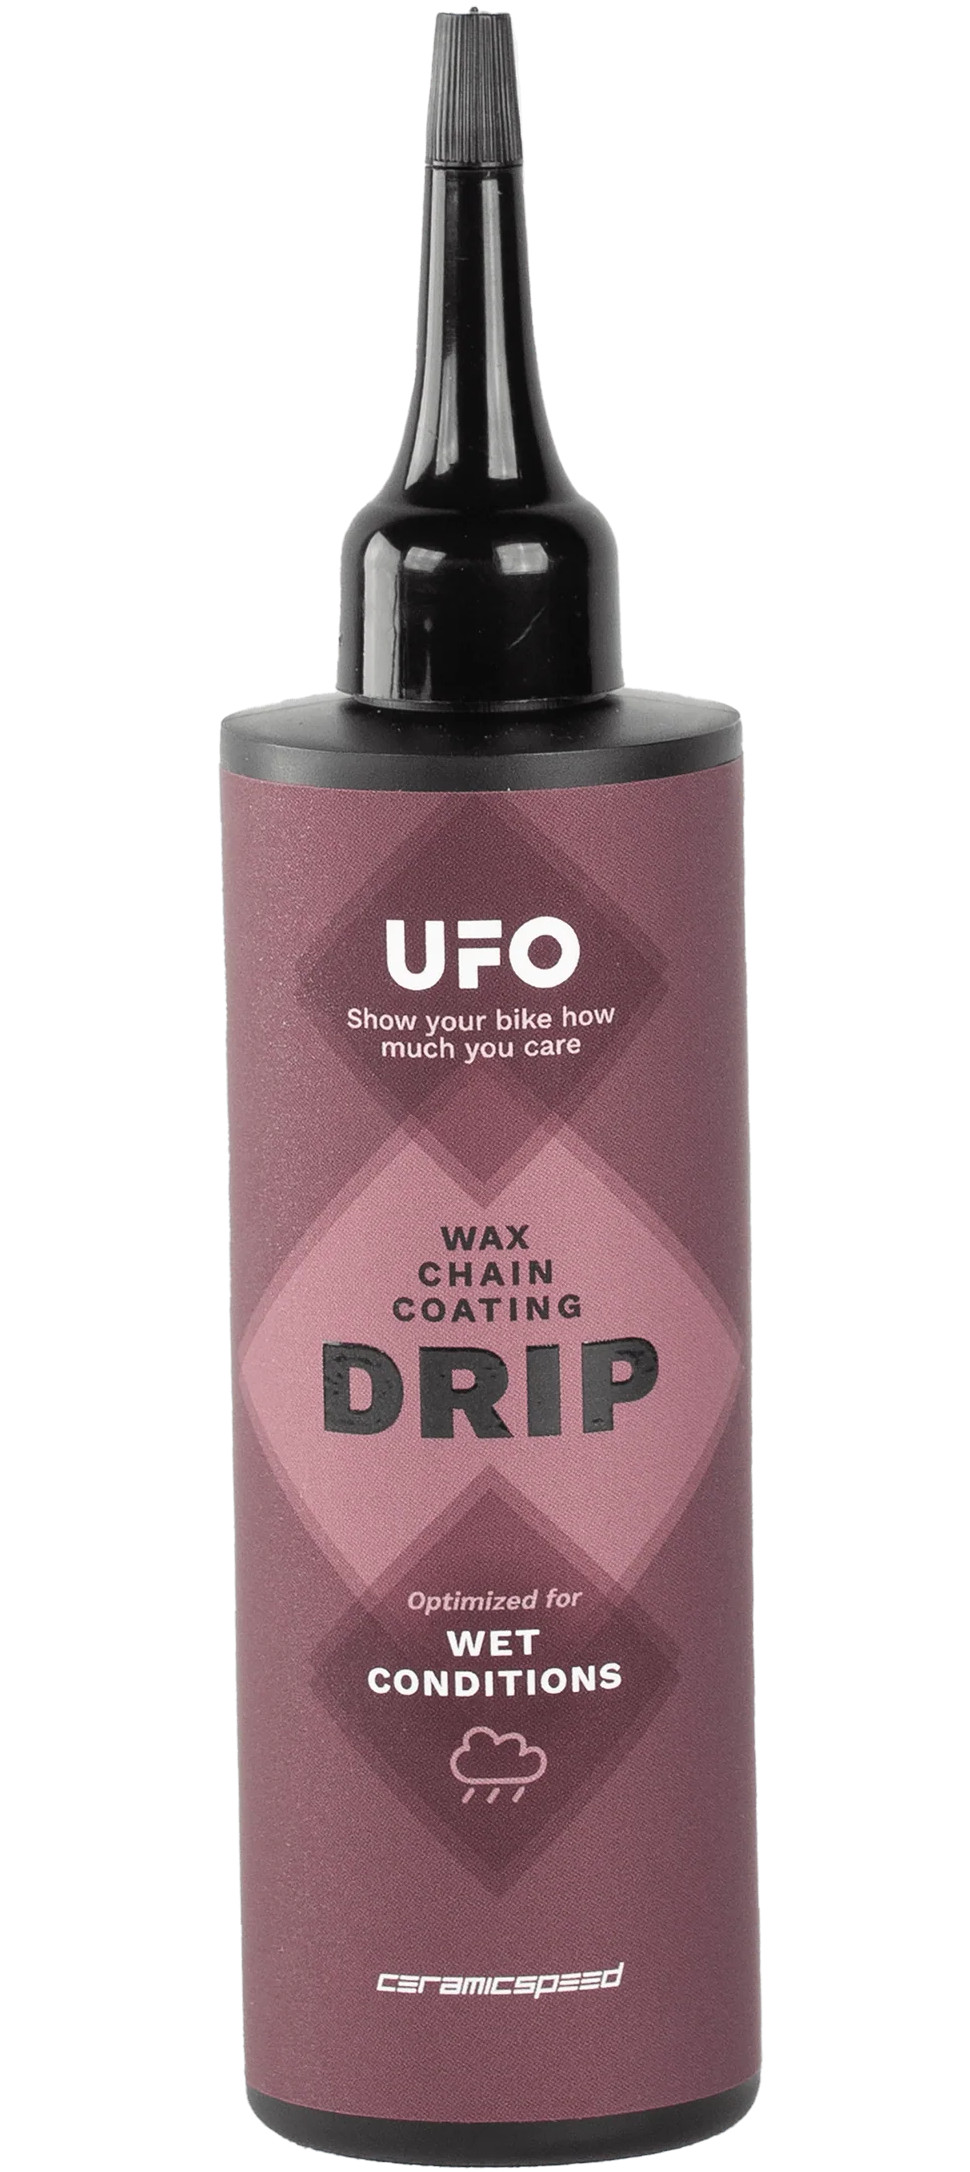 UFO Drip Wet Conditions 